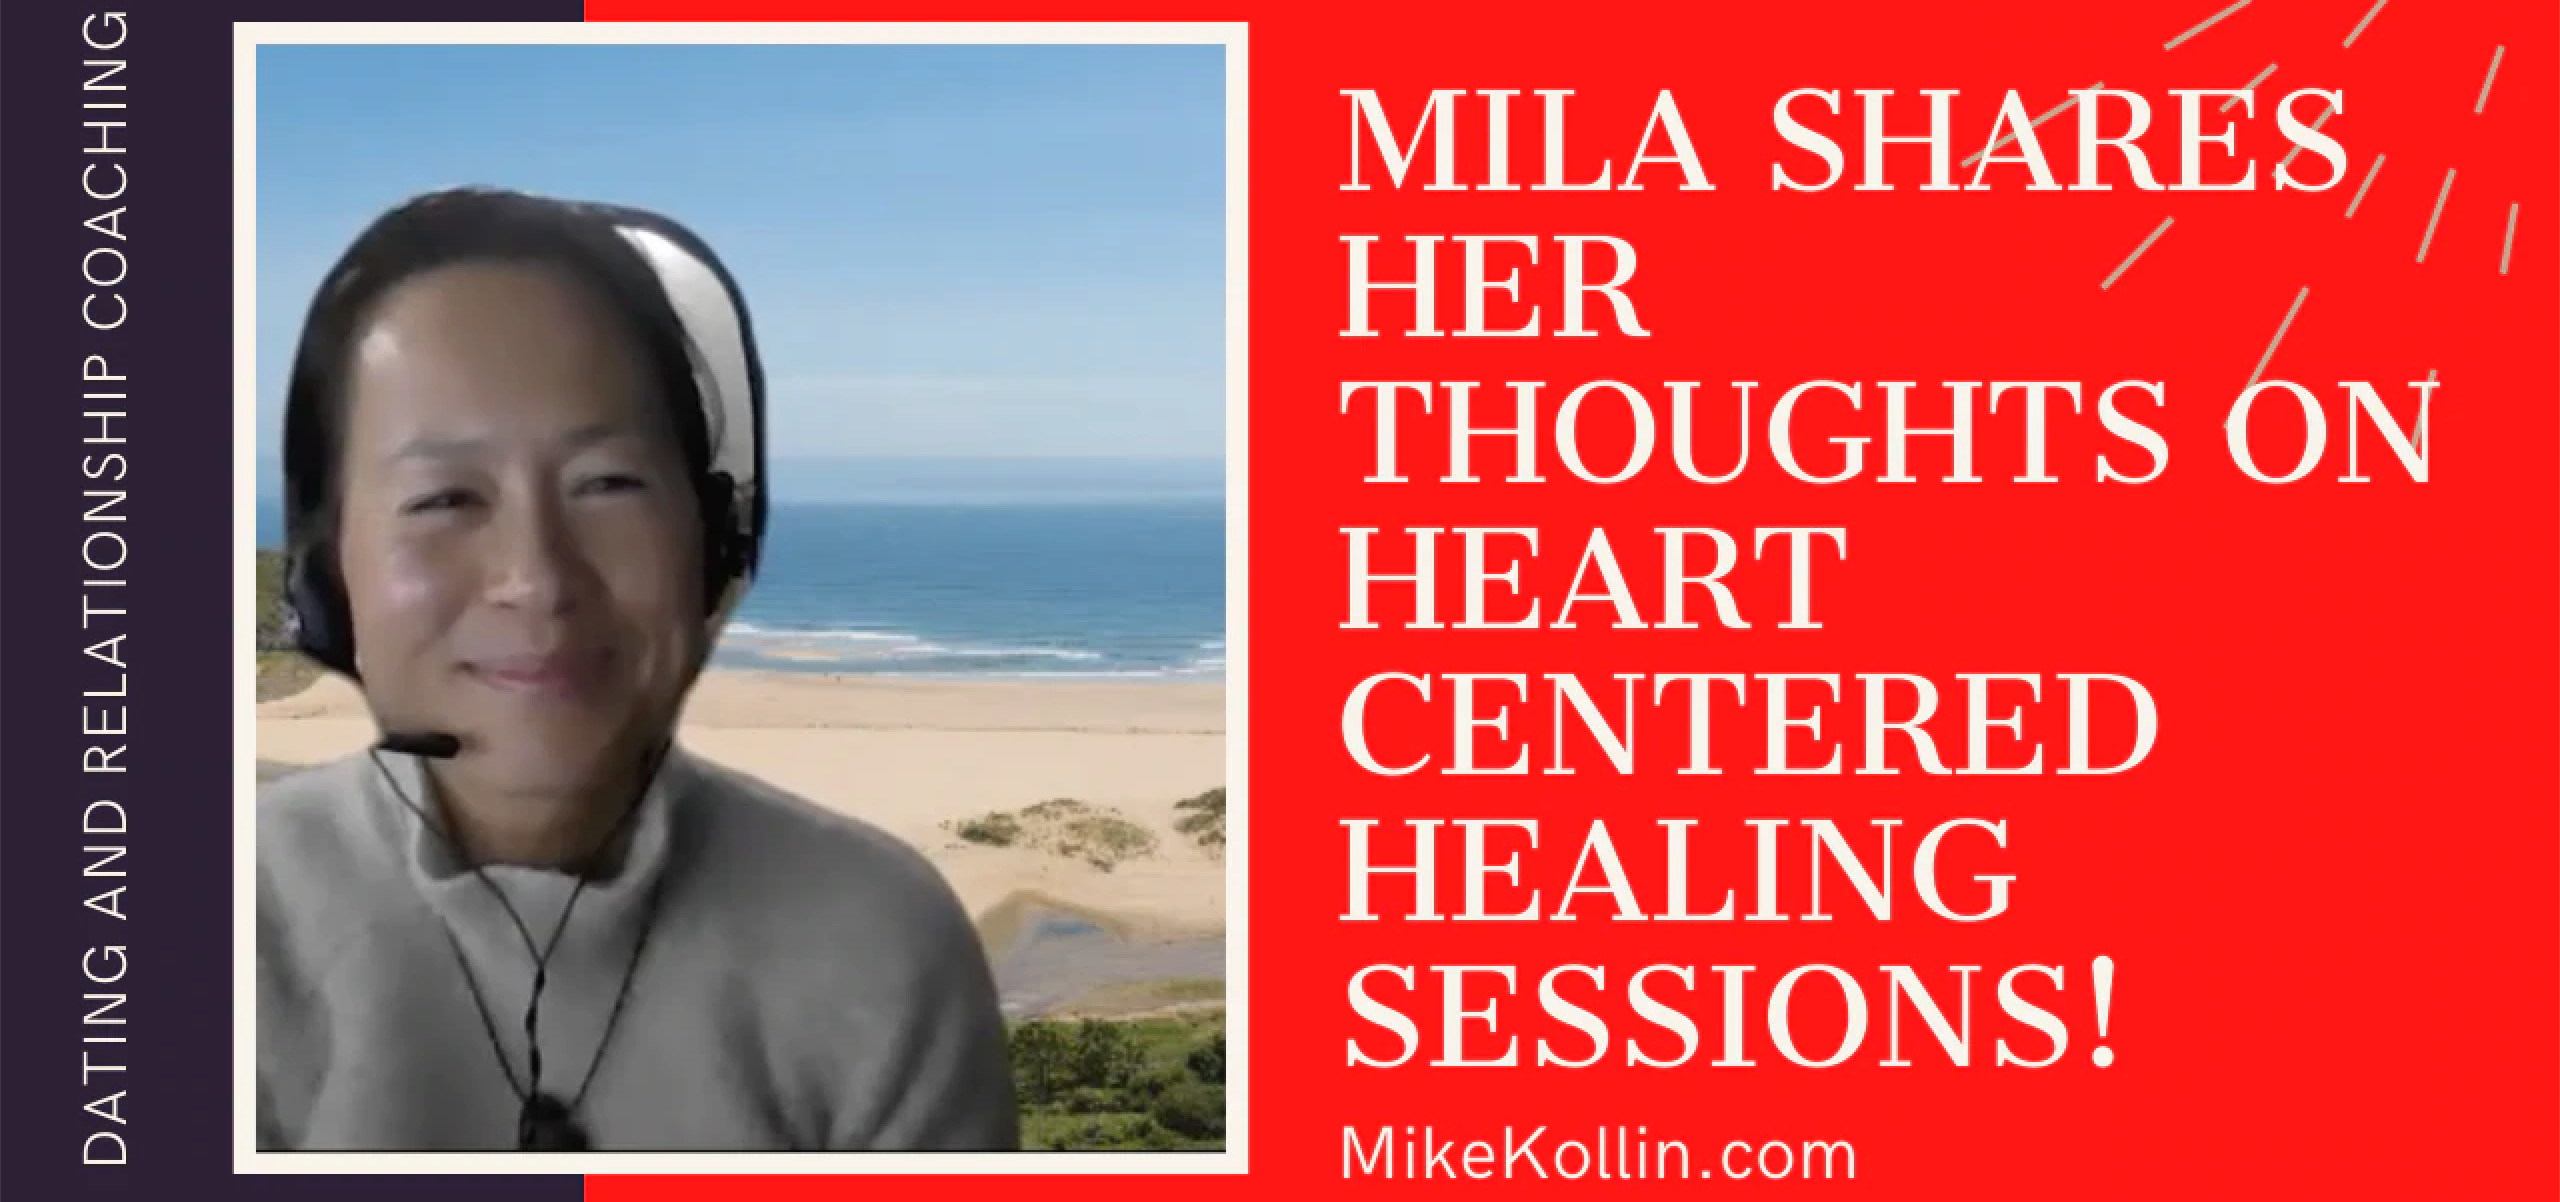 Load video: Cute Asian Lady smiling with Headphones on Talking to Mike Kollin through Zoom | Mila Shares Her Thoughts on Heart Centered Healing with Mike Kollin